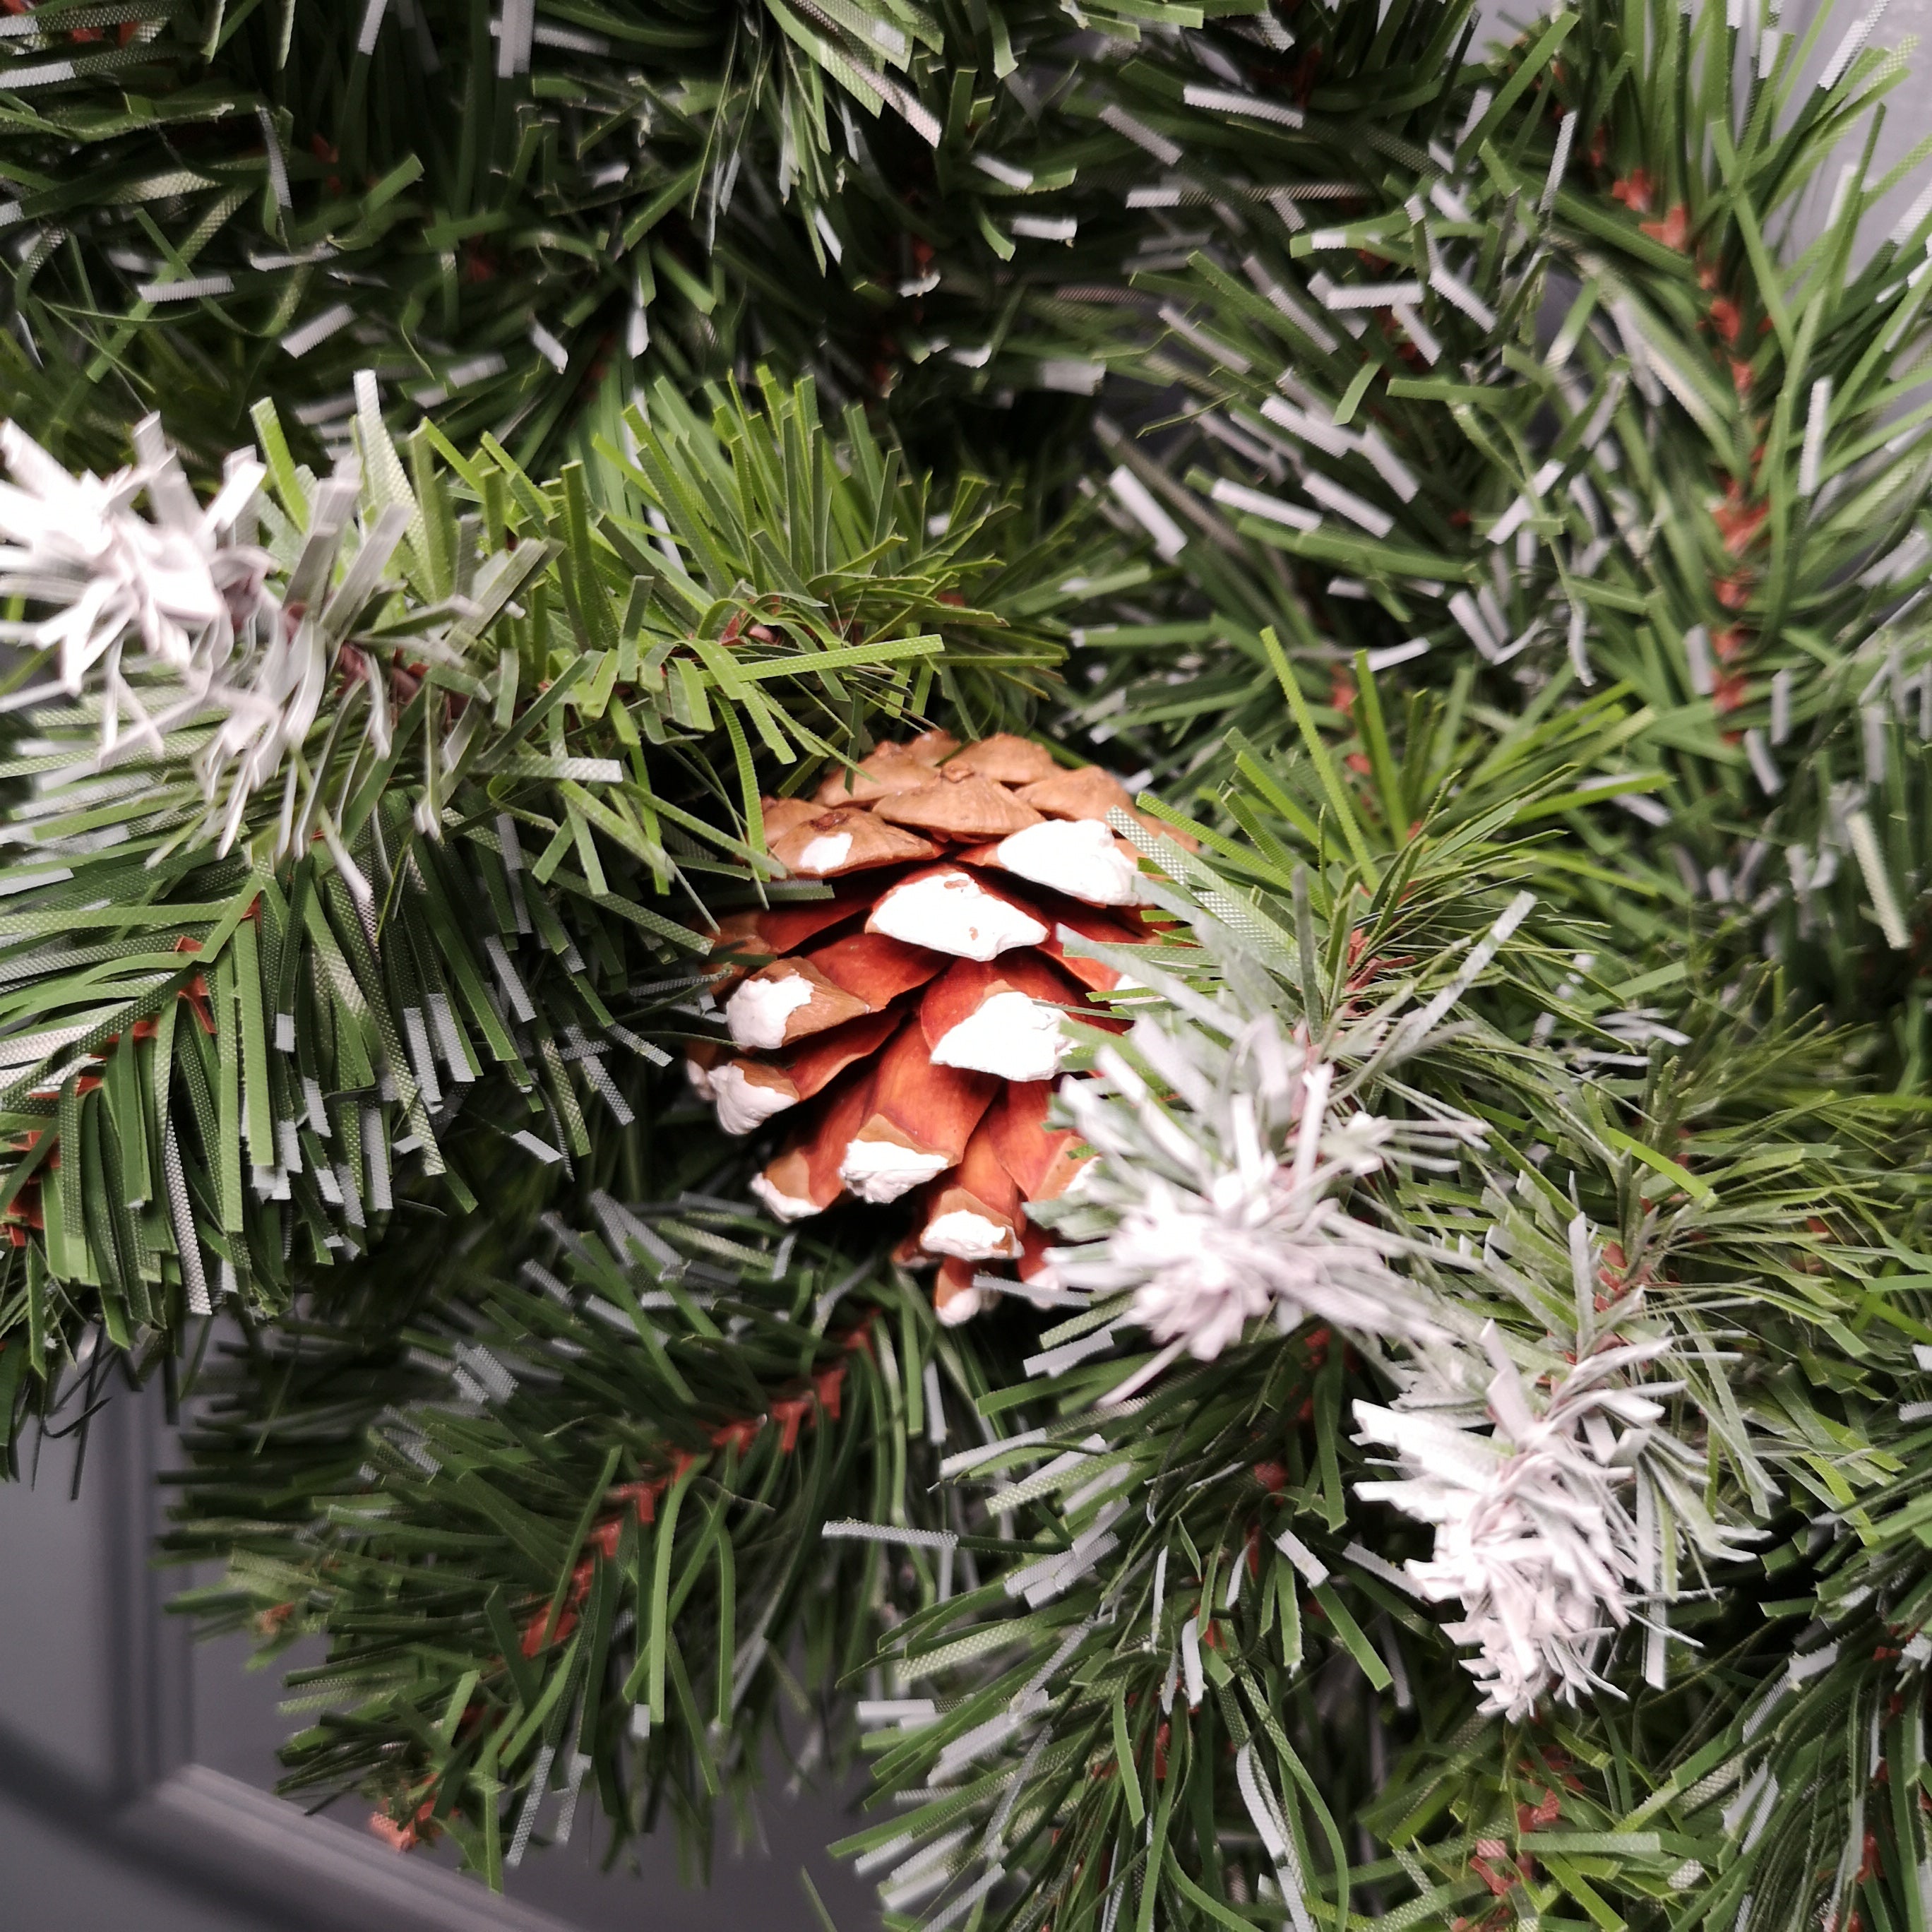 60cm Snow King Fir Green Christmas Wreath with Pine Cones